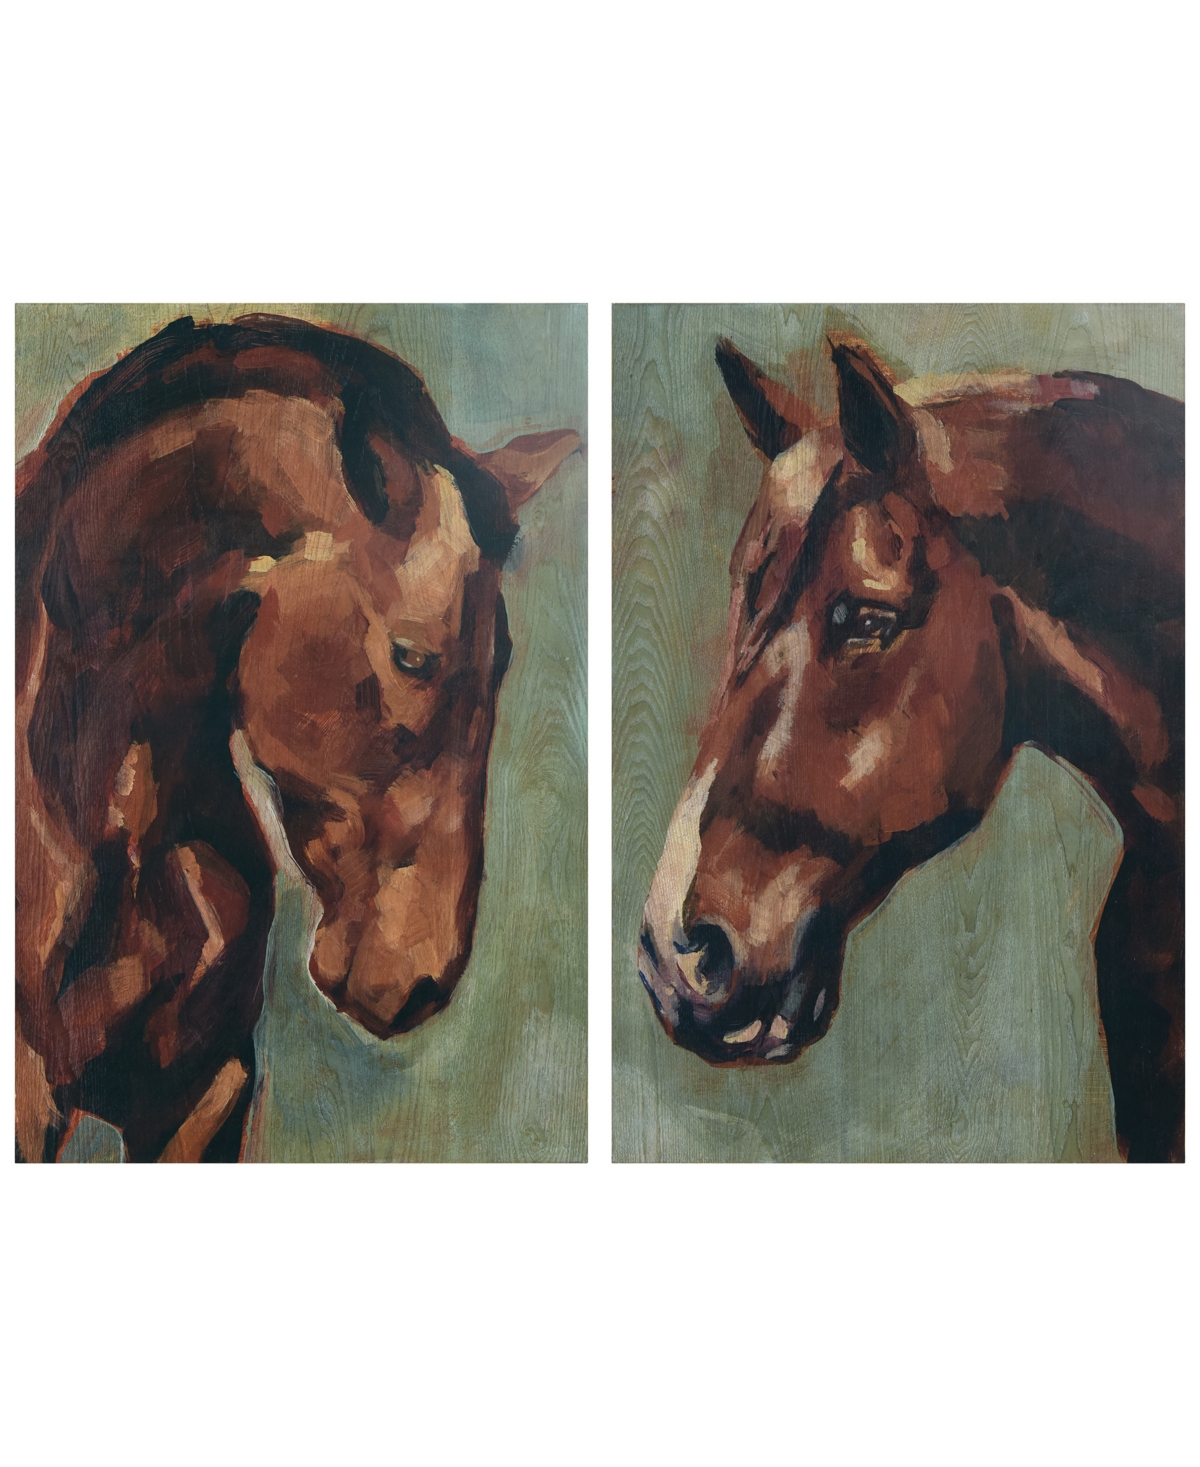 Empire Art Direct "horse Portrait" Fine Giclee Printed Directly On Hand Finished Ash Wood Wall Art Set Of 2, 36" X 24" In Brown,green